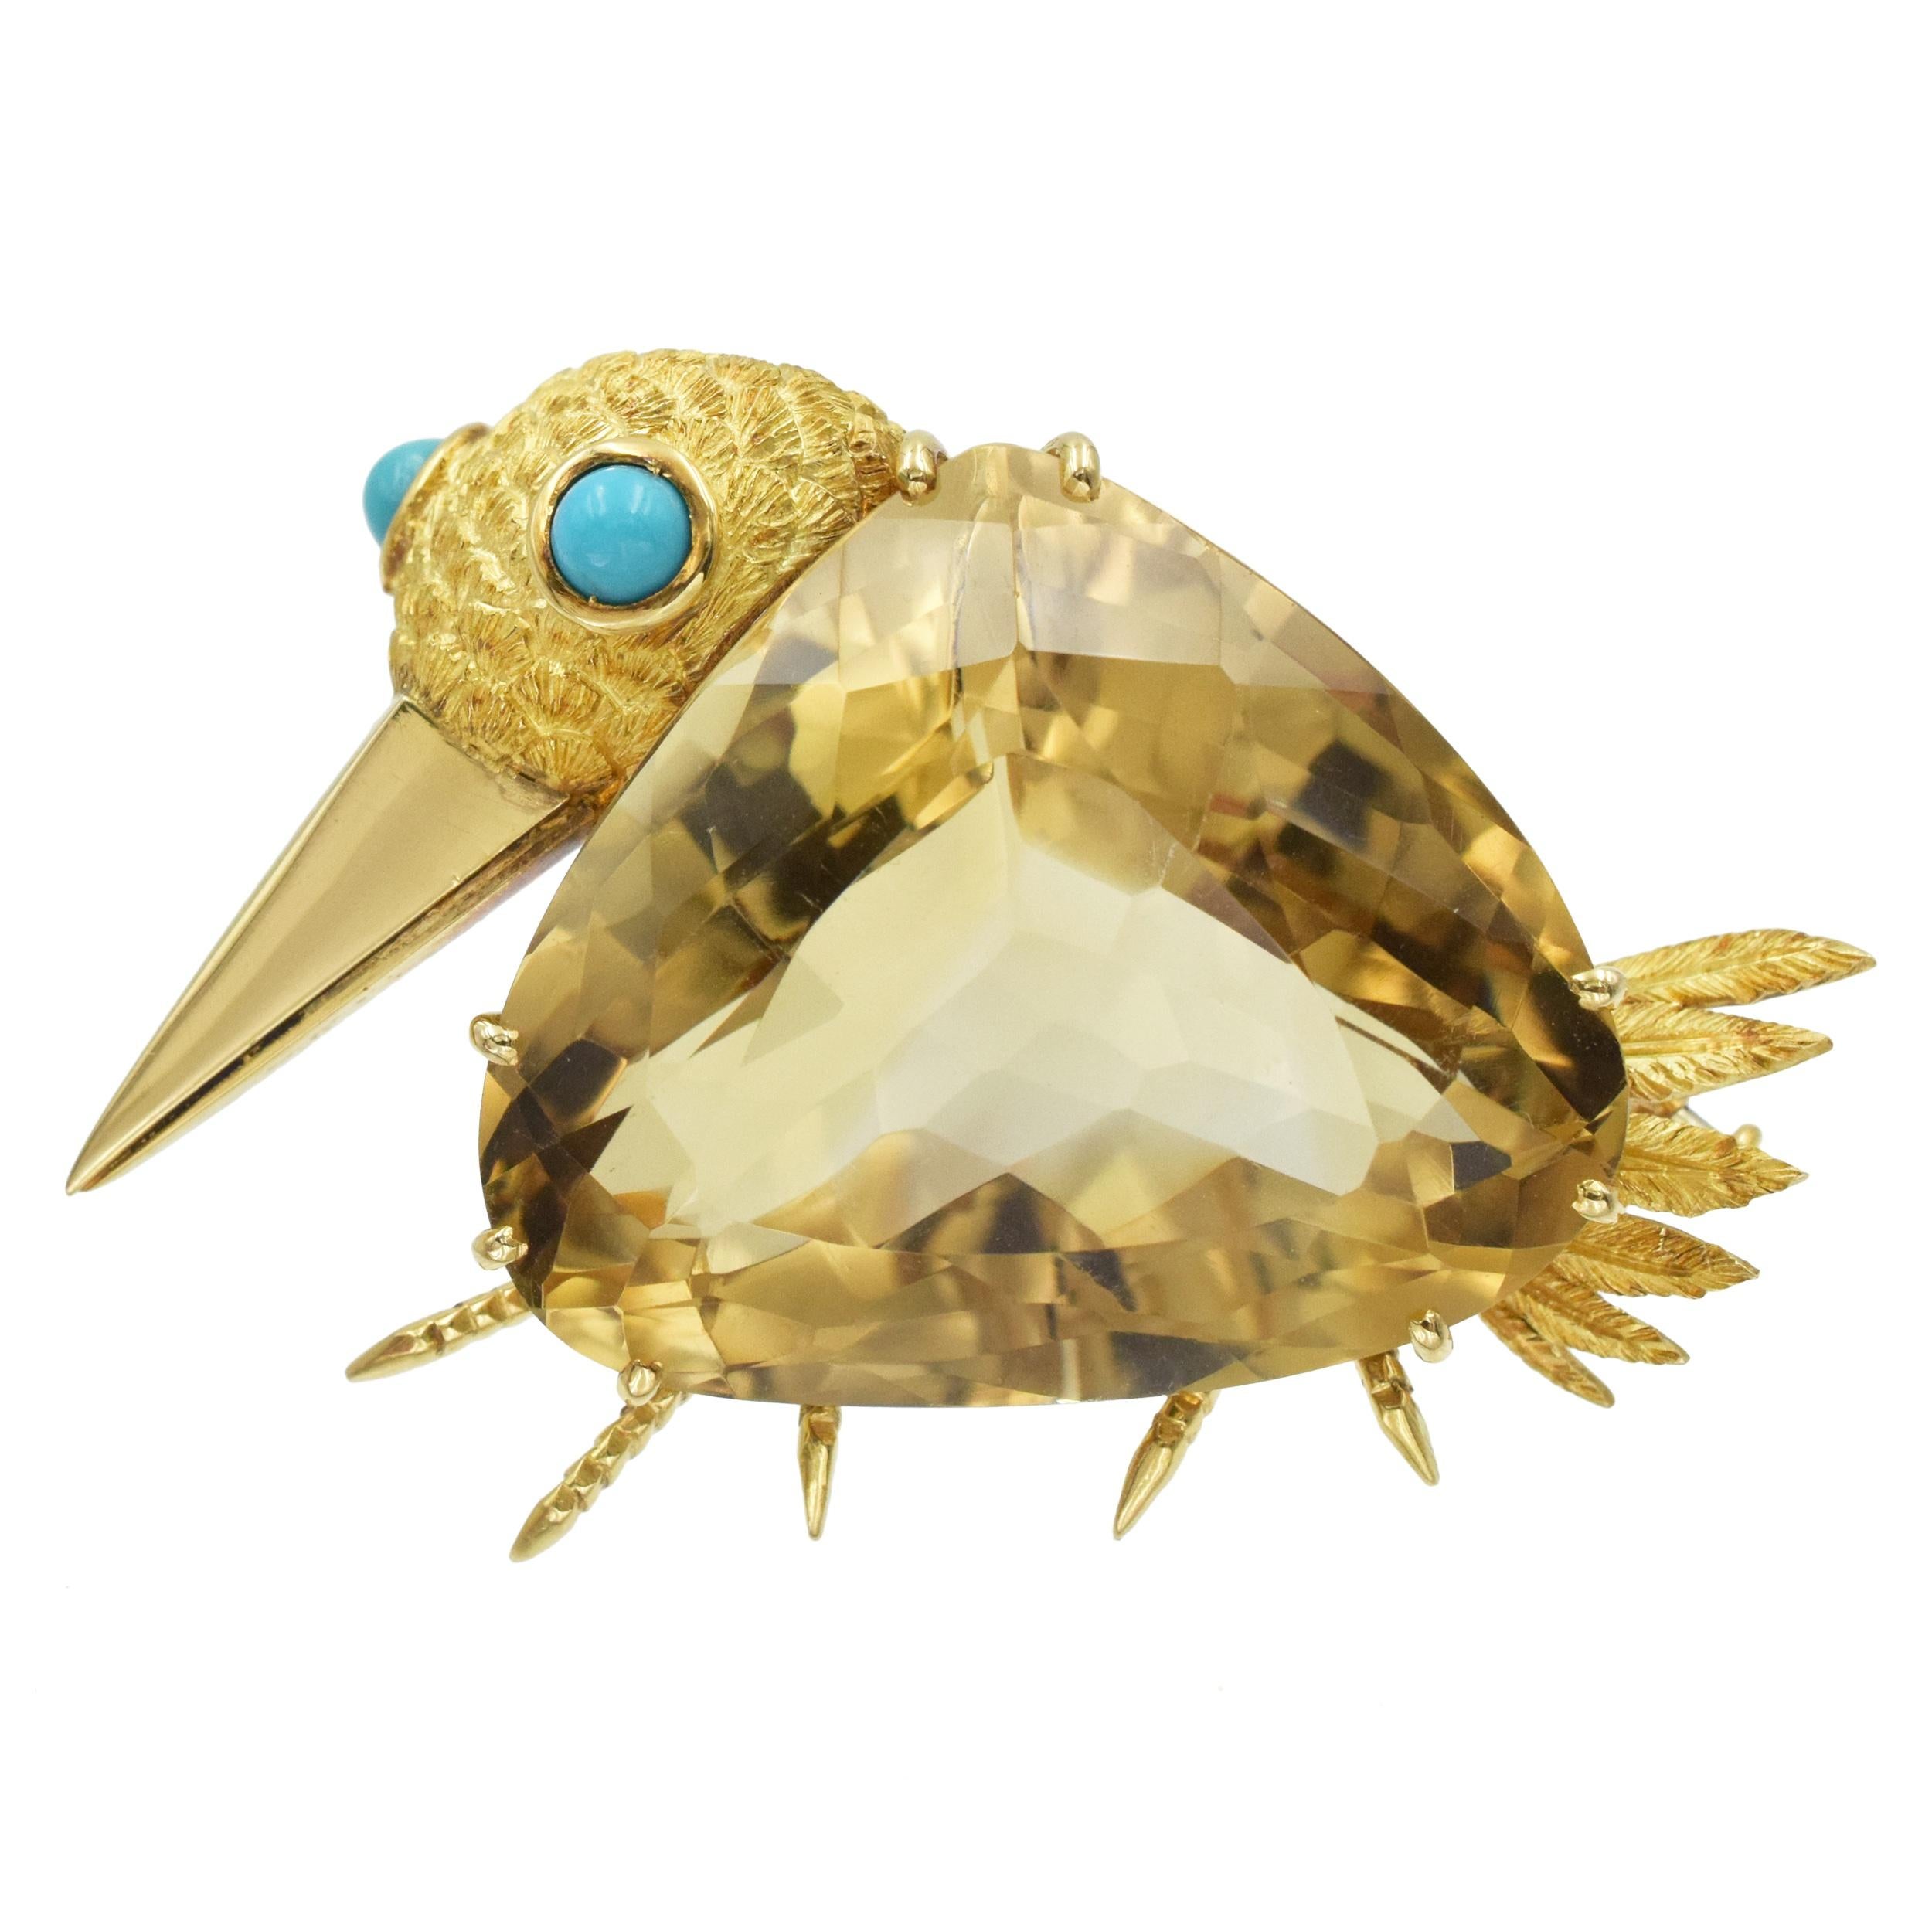 Cartier whimsical Bird brooch in 18k yellow gold. This vintage brooch features a bird
with citrine body, textured 18k yellow gold feathers, feet and head. The eyes set with two round cabochon cut turquoises. Equipped with double pin. Inscribed: